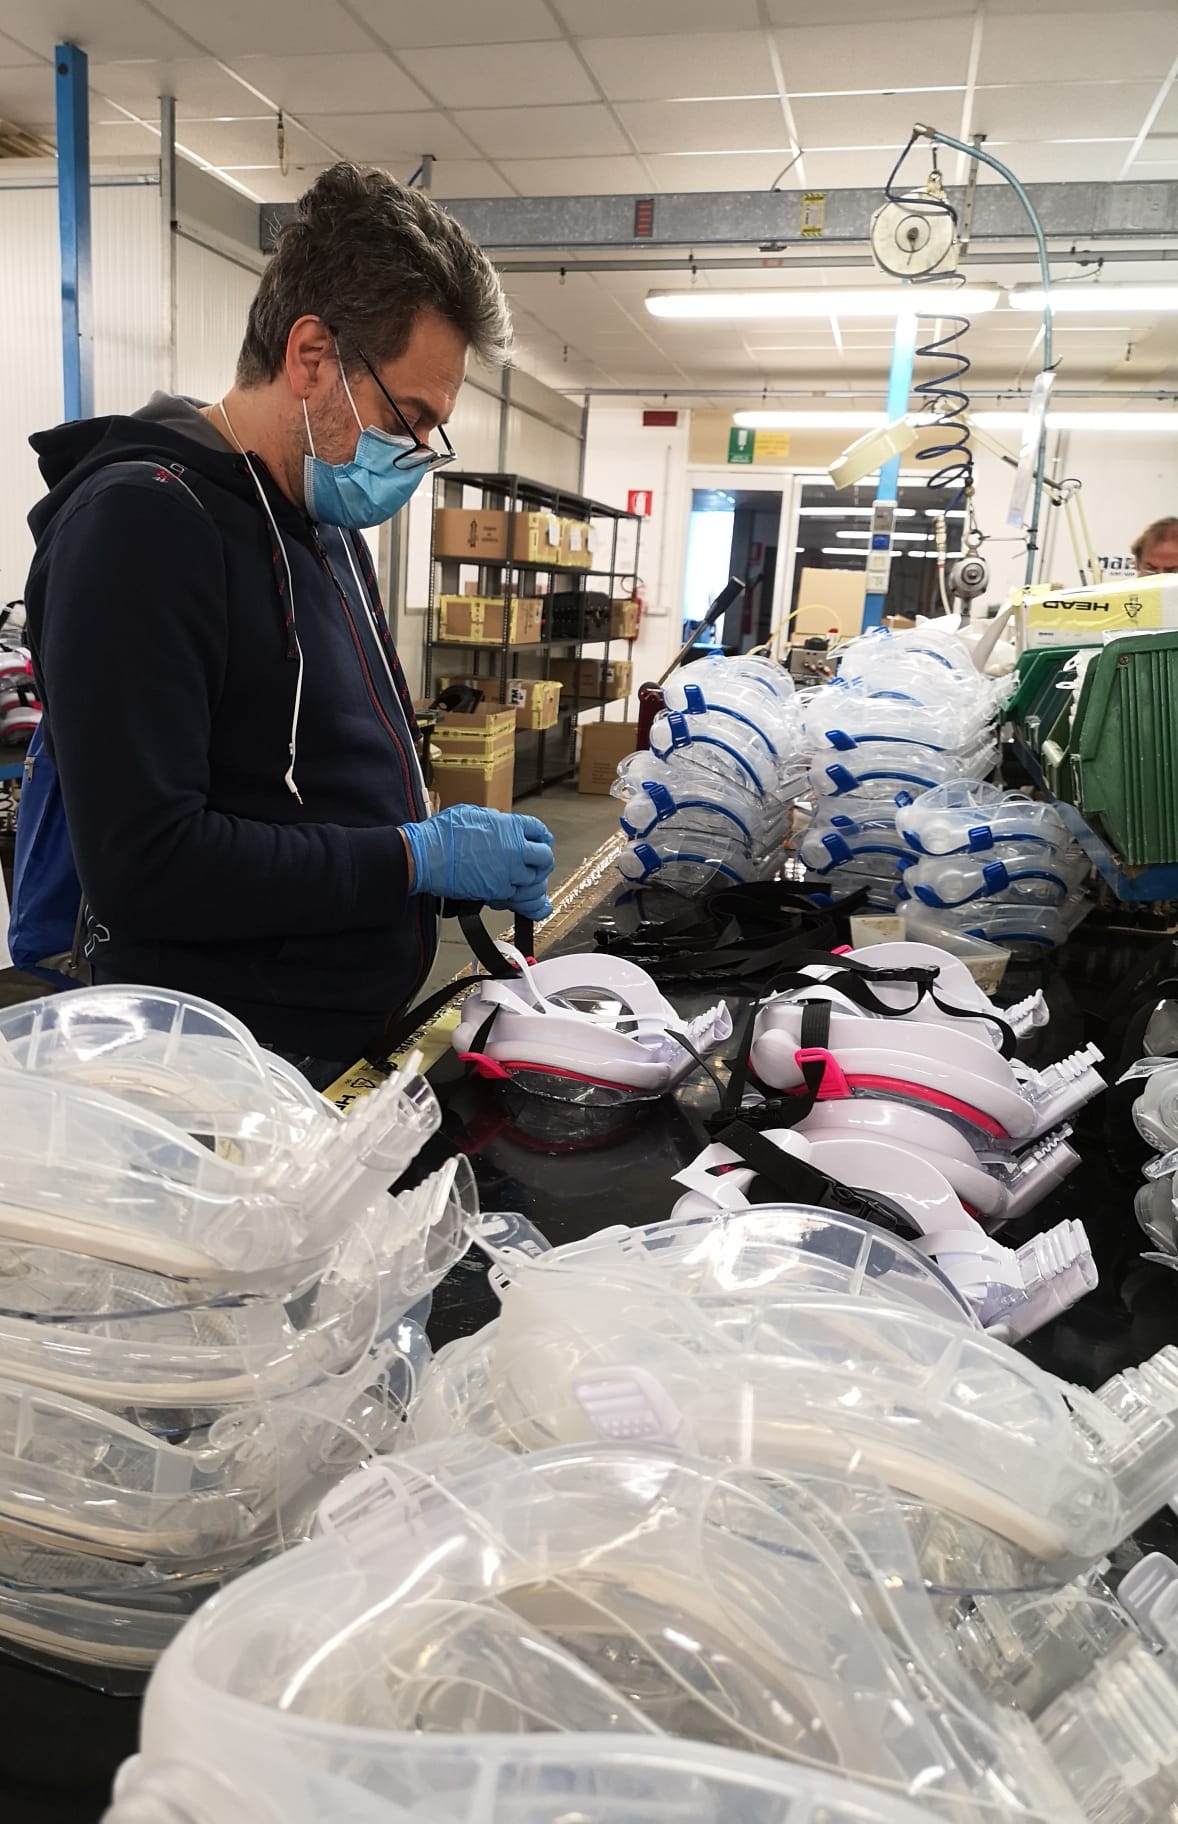 Production of CPAP respirators